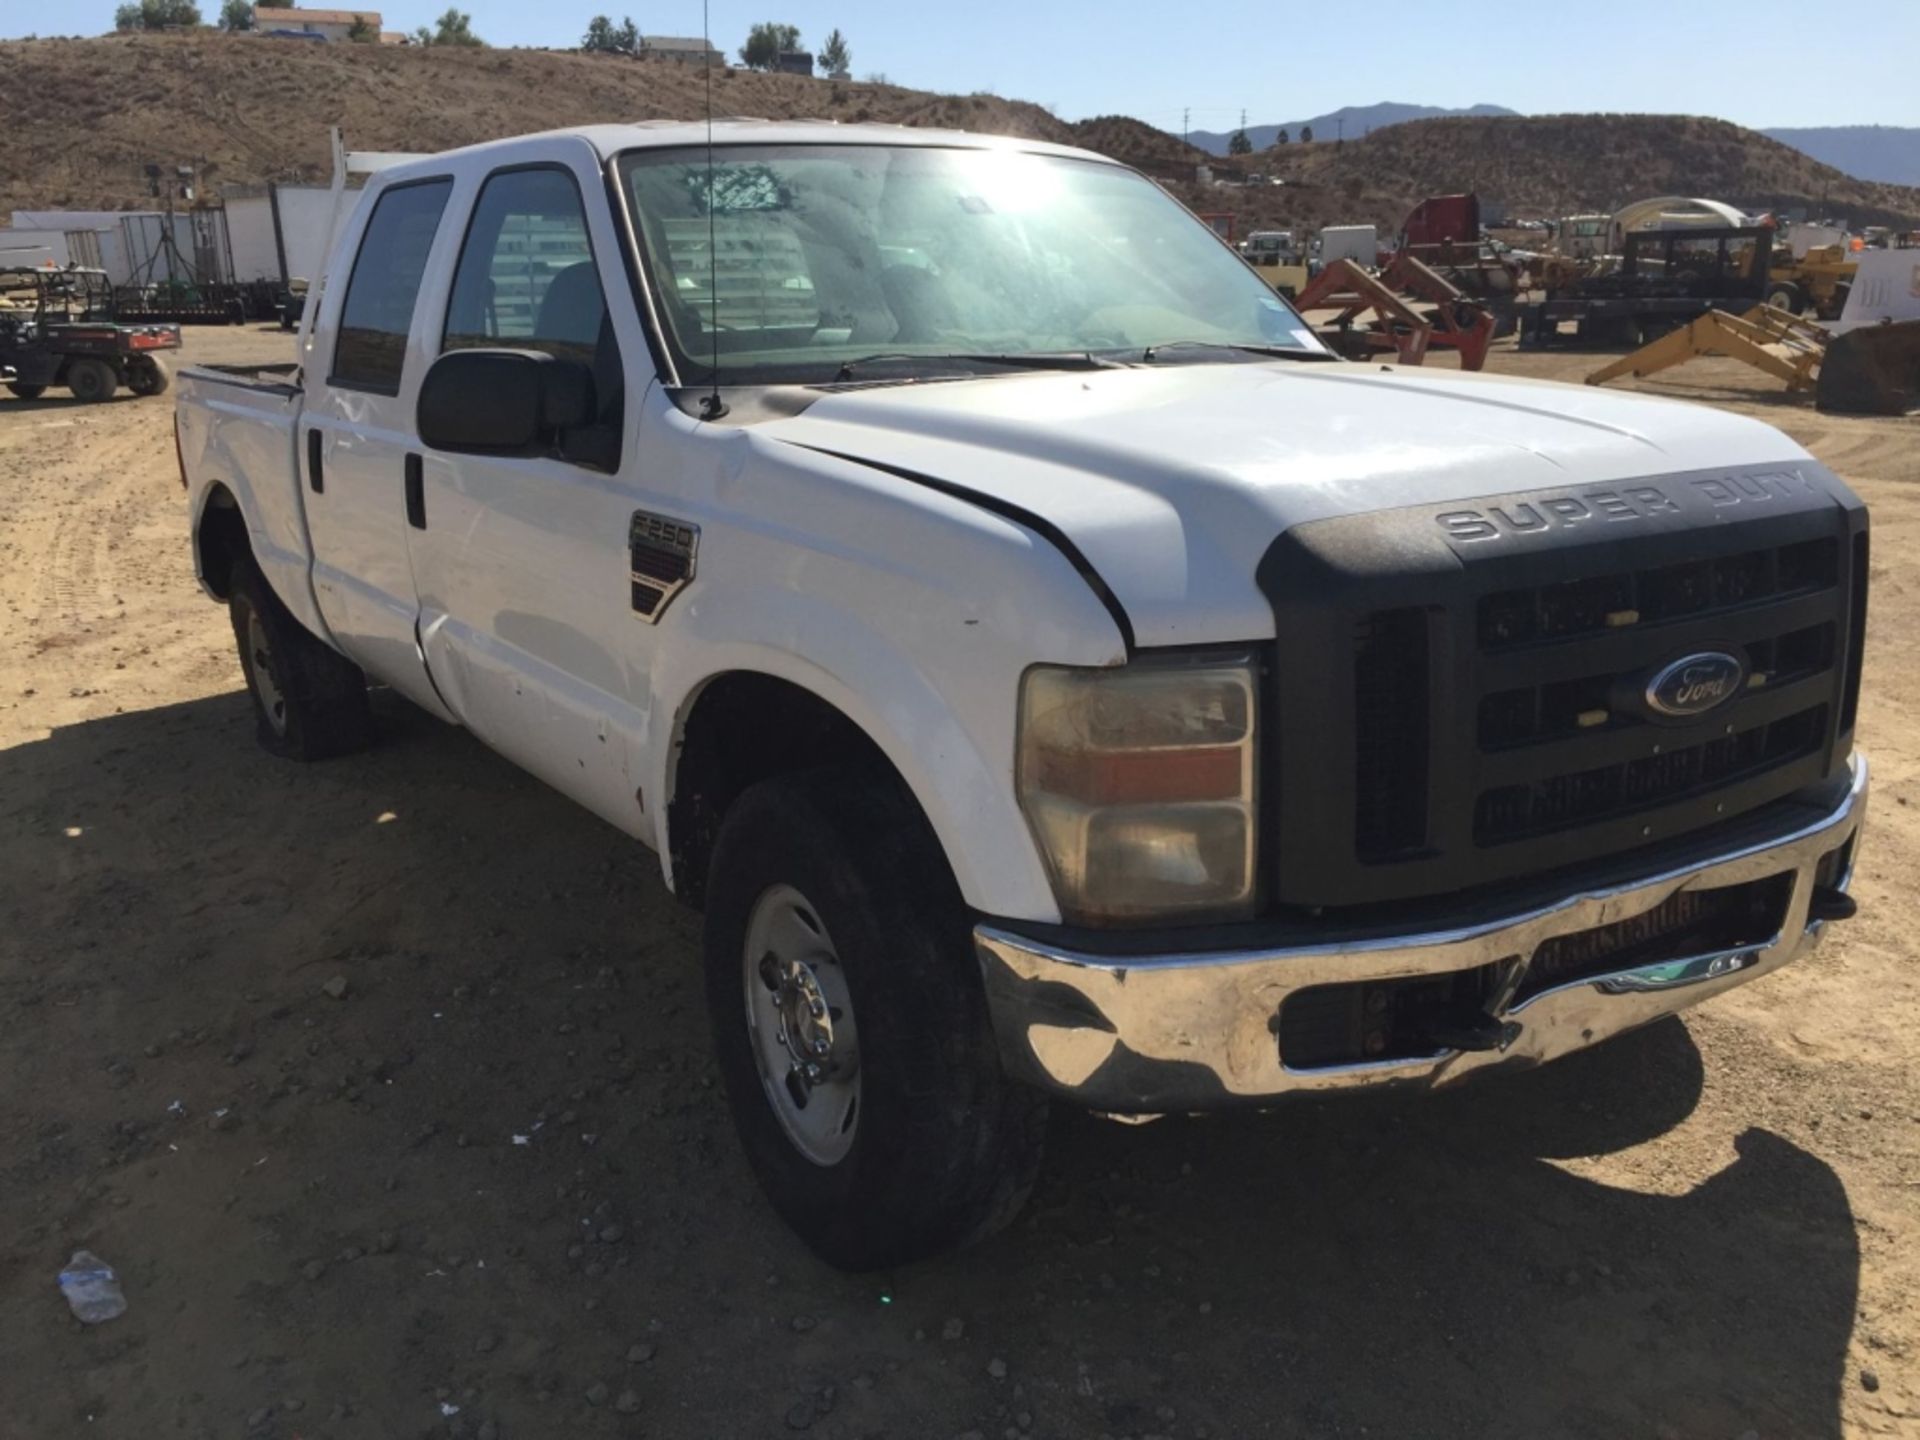 Ford F250 Crew Cab Pickup, - Image 2 of 20